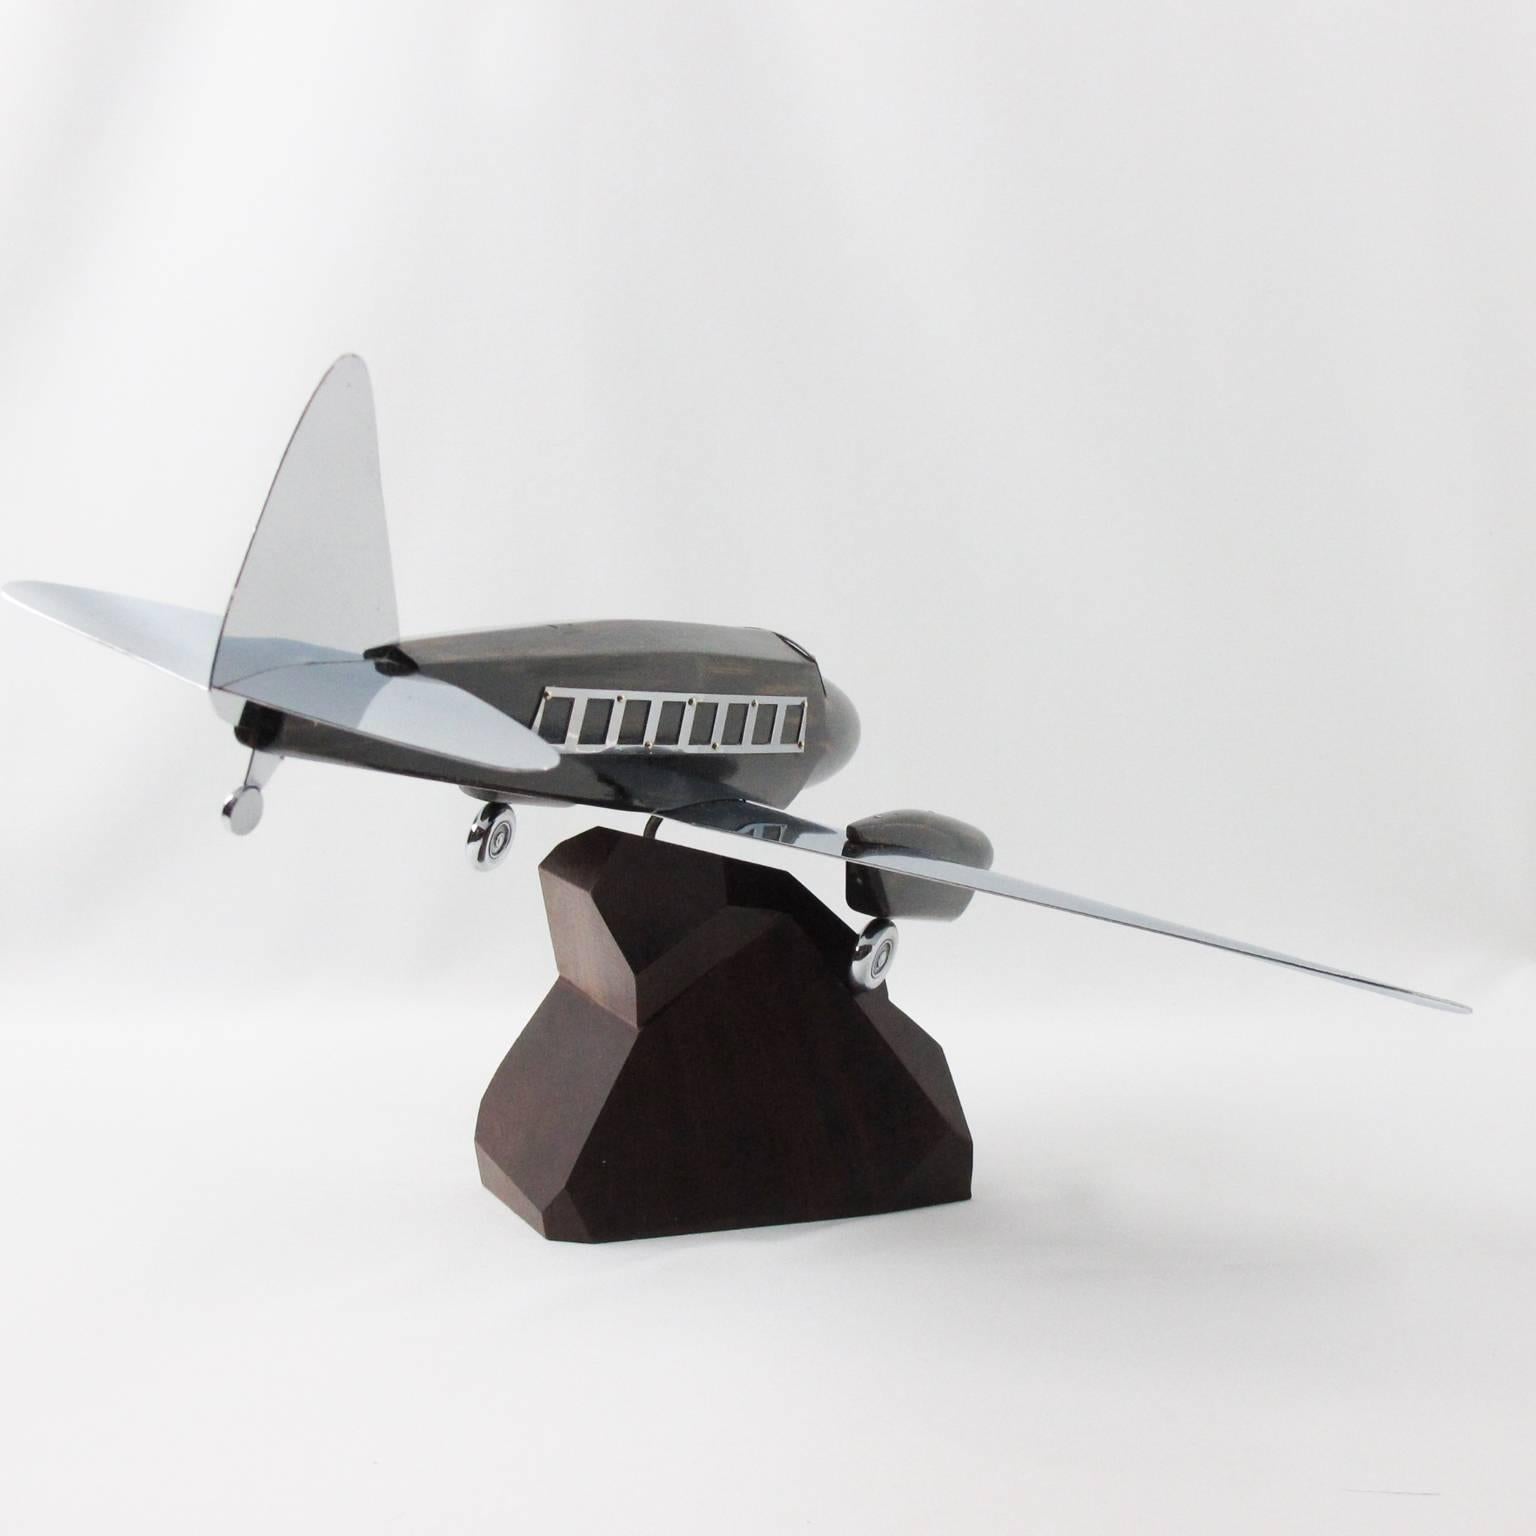 Stunning French Art Deco wood and chrome airplane model, mounted on a stylized wooden plinth. This large Art Deco Model airplane is made of solid wood with Macassar wood imitation textured pattern and chromed metal wings, tail, wheels and accents.